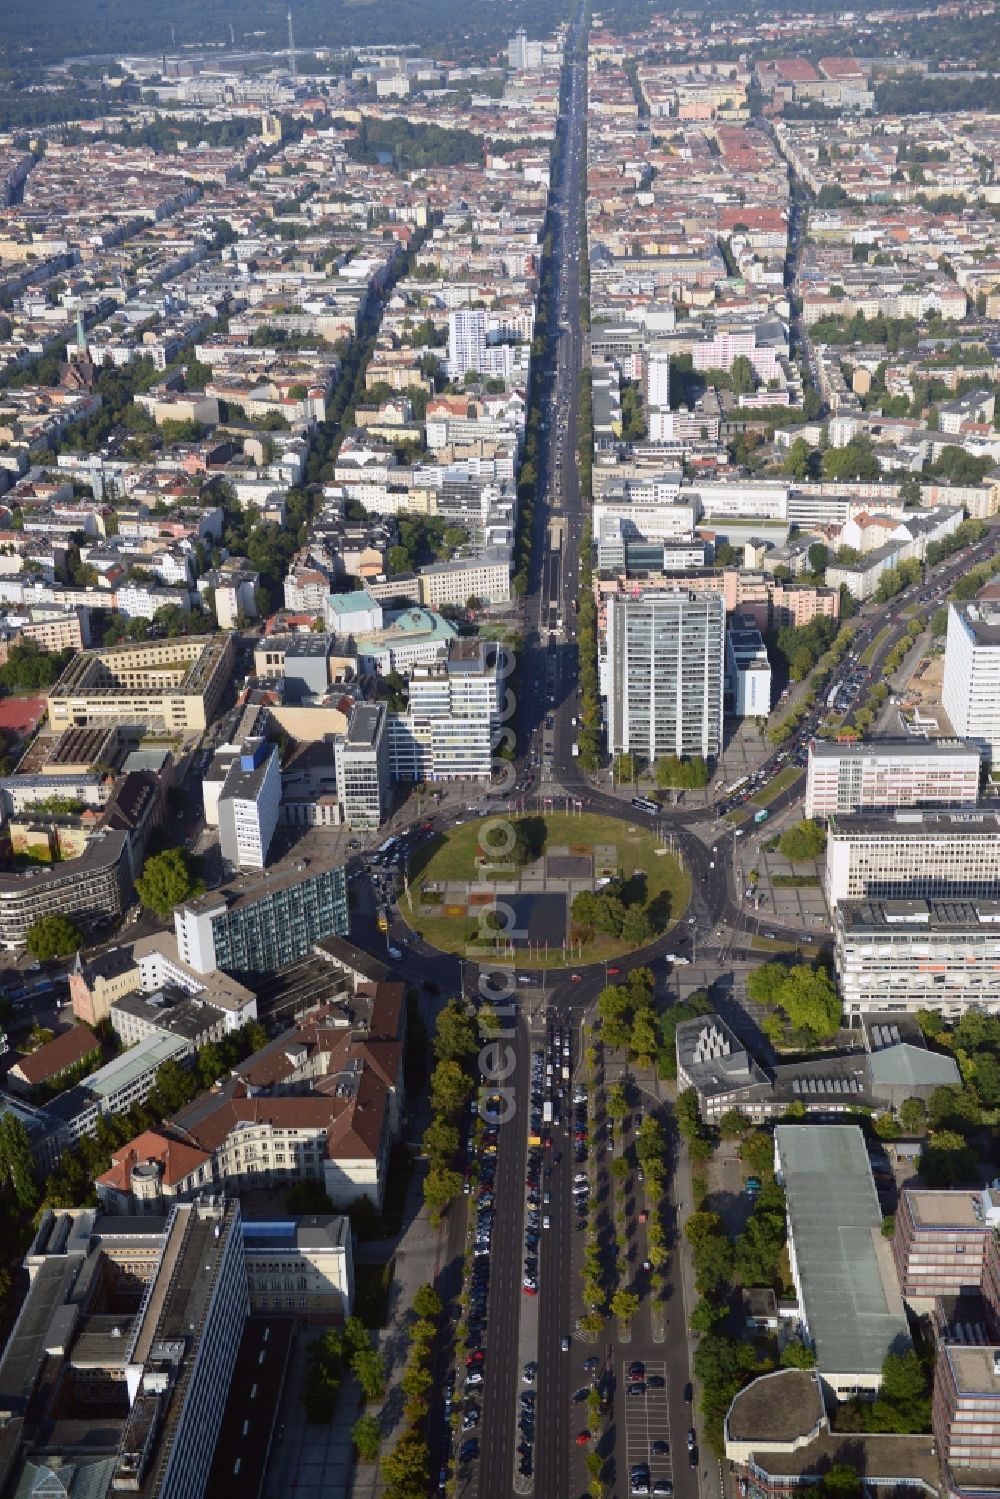 Berlin from the bird's eye view: Residential and commercial area at the Ernst-Reuter-Platz in Berlin Charlottenburg